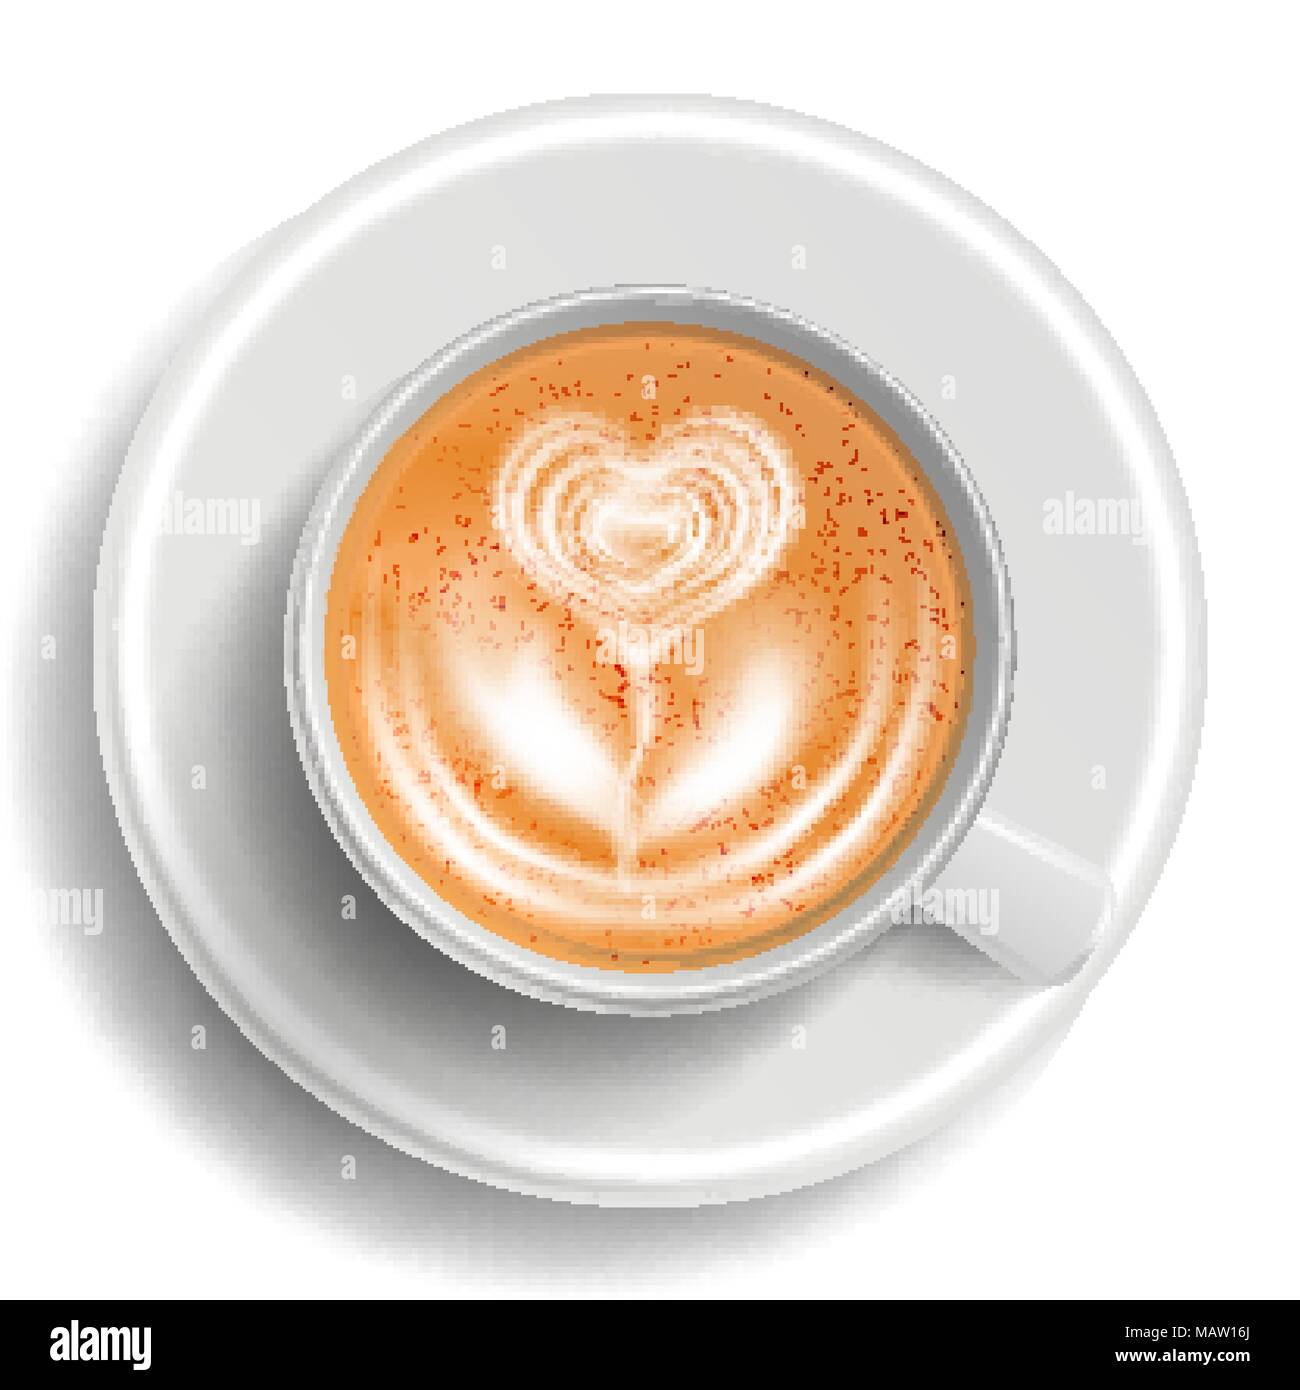 https://c8.alamy.com/comp/MAW16J/coffee-art-cup-vector-top-view-hot-cappuccino-coffee-milk-espresso-fast-food-cup-beverage-white-mug-realistic-isolated-illustration-MAW16J.jpg